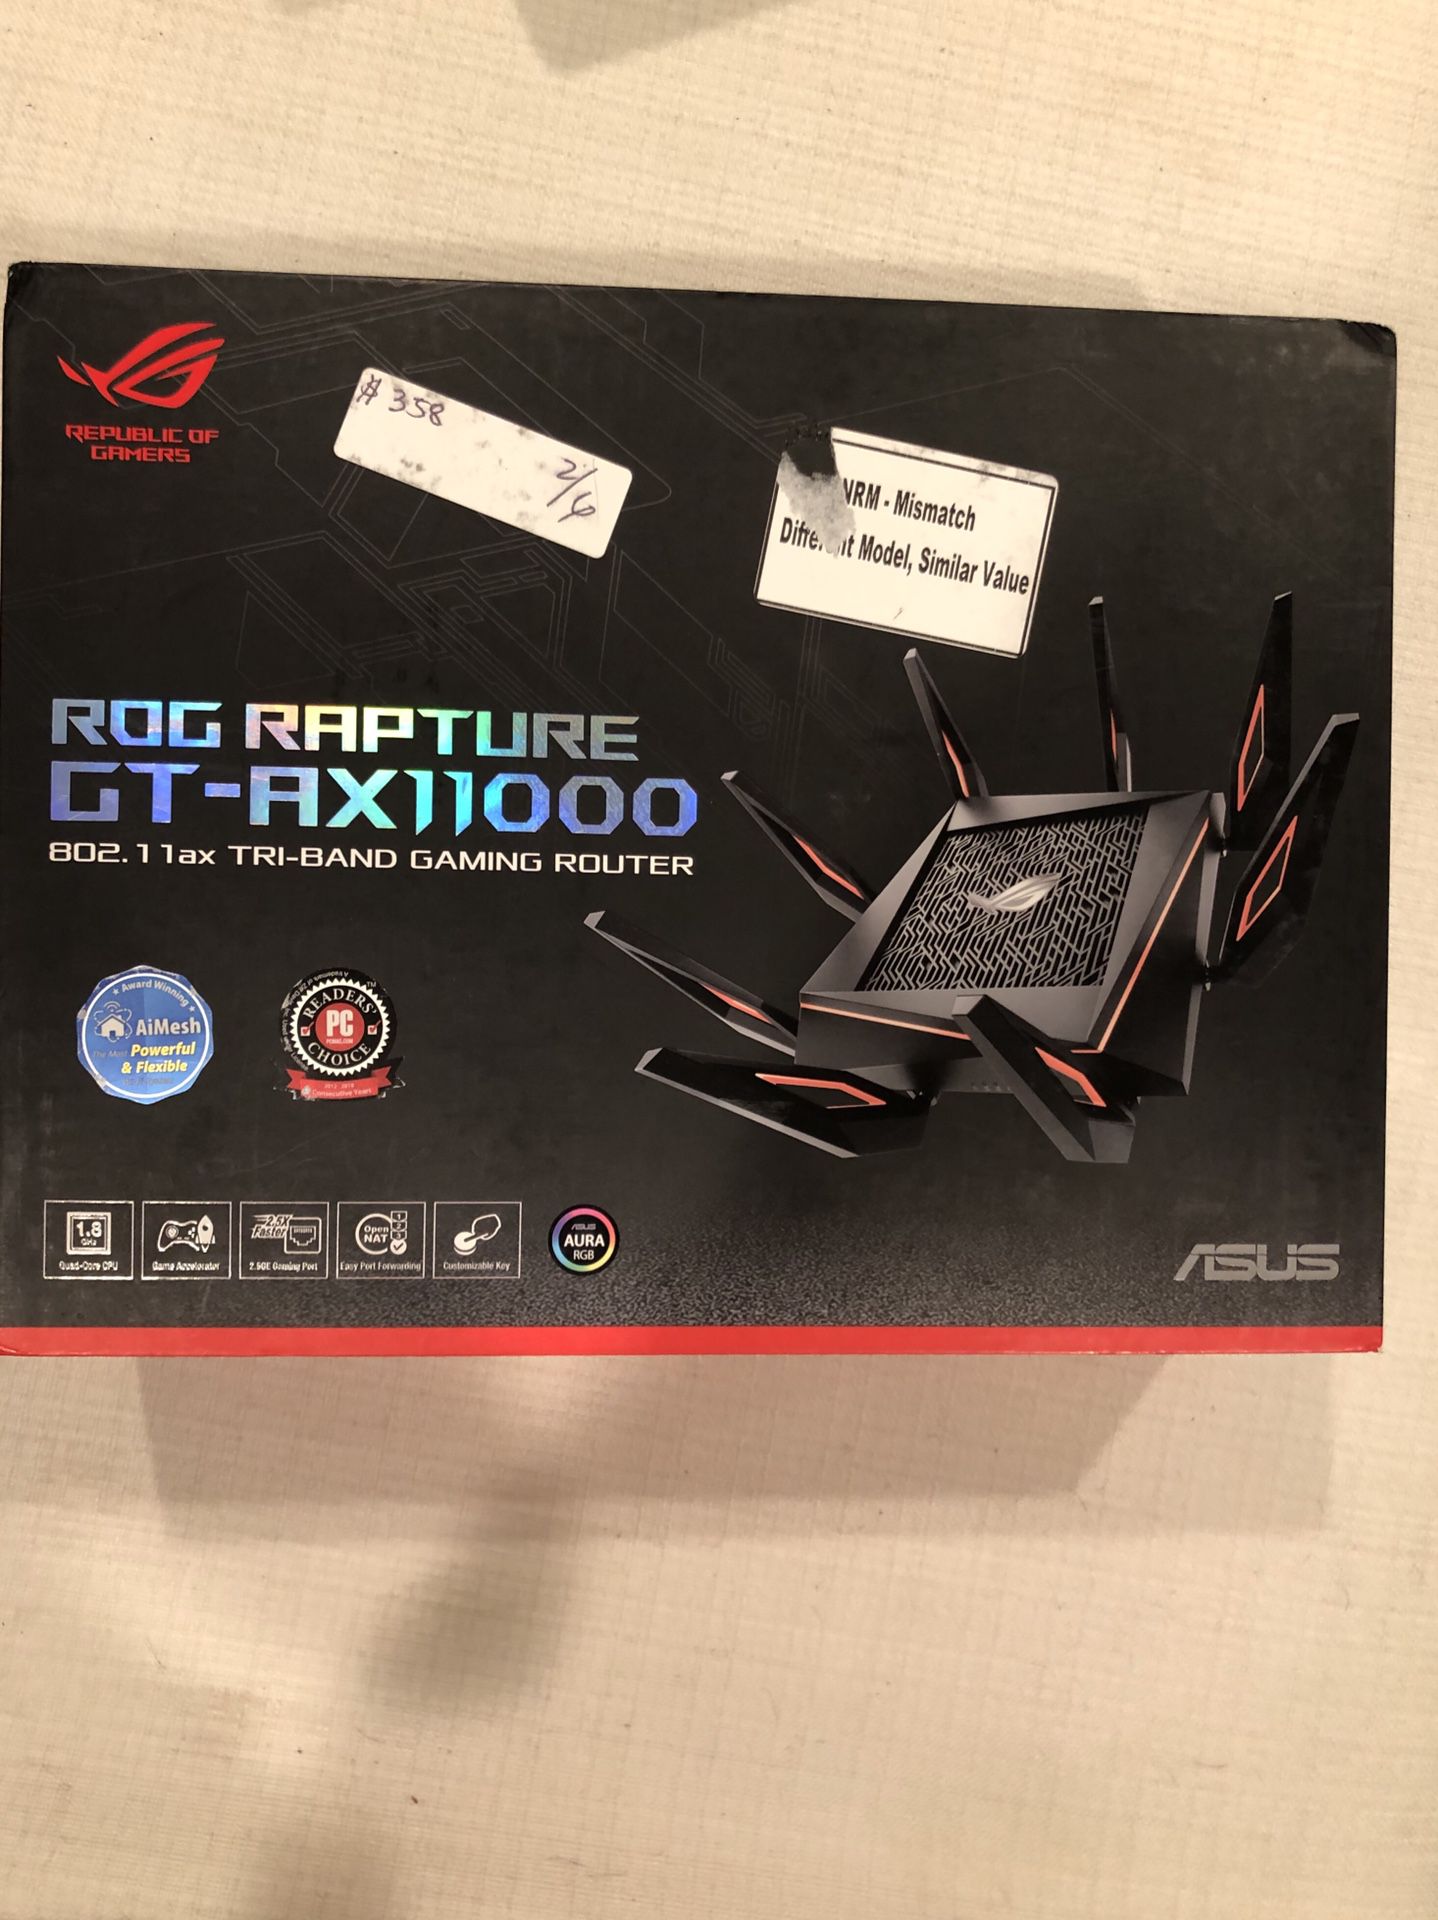 Rog rapture GT-AX11000 gaming router